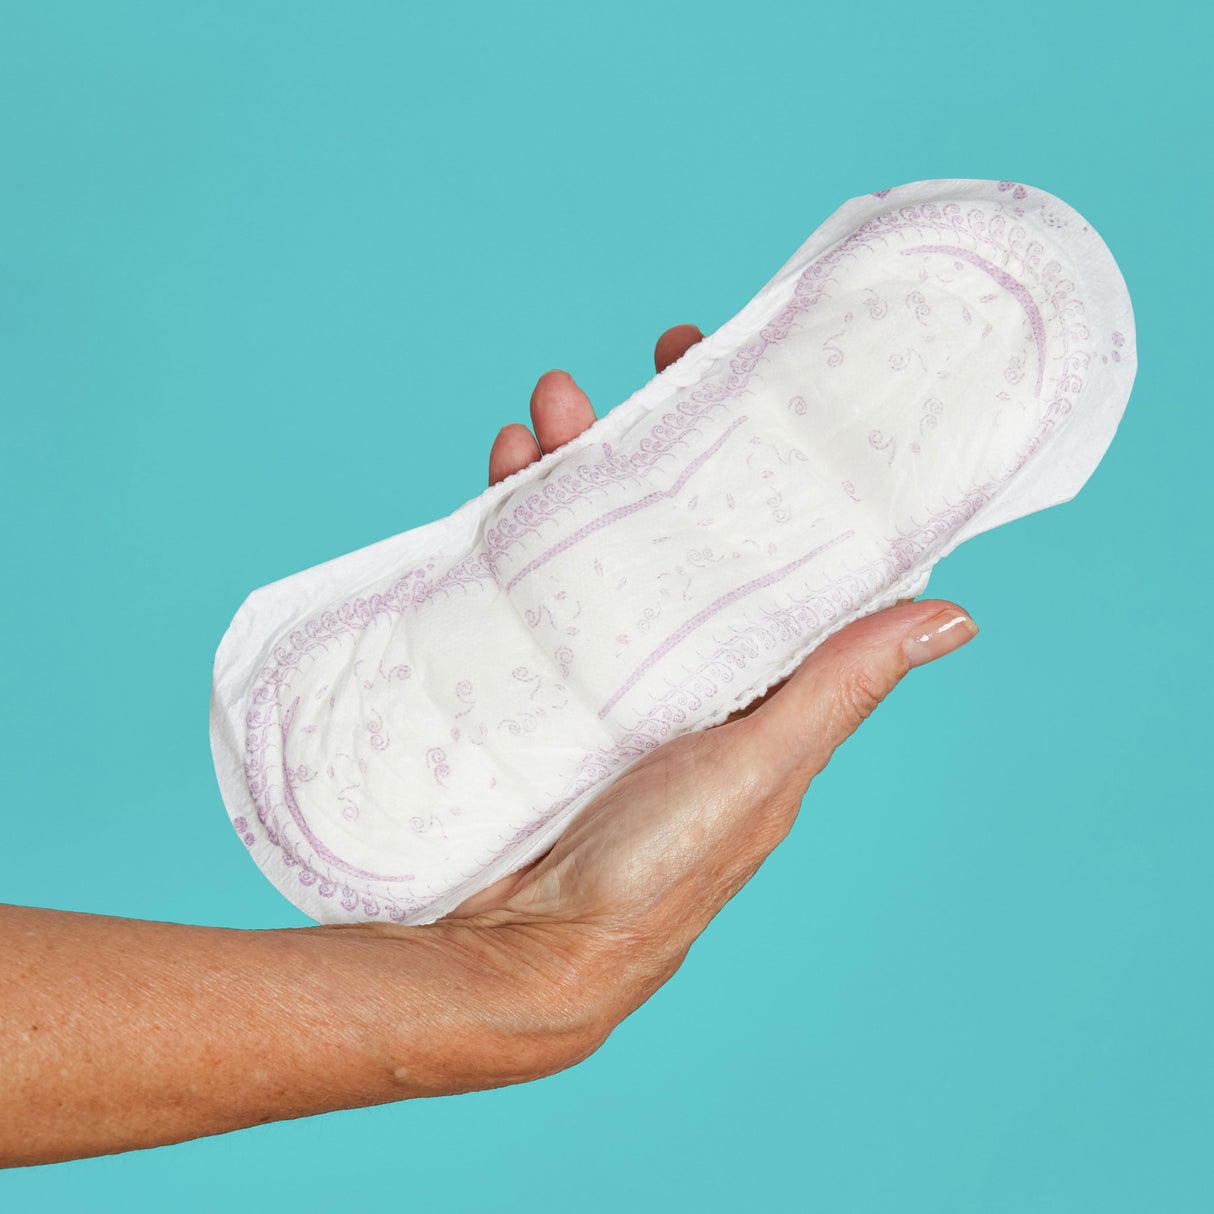 Woman holding a pad in her hand that looks soft